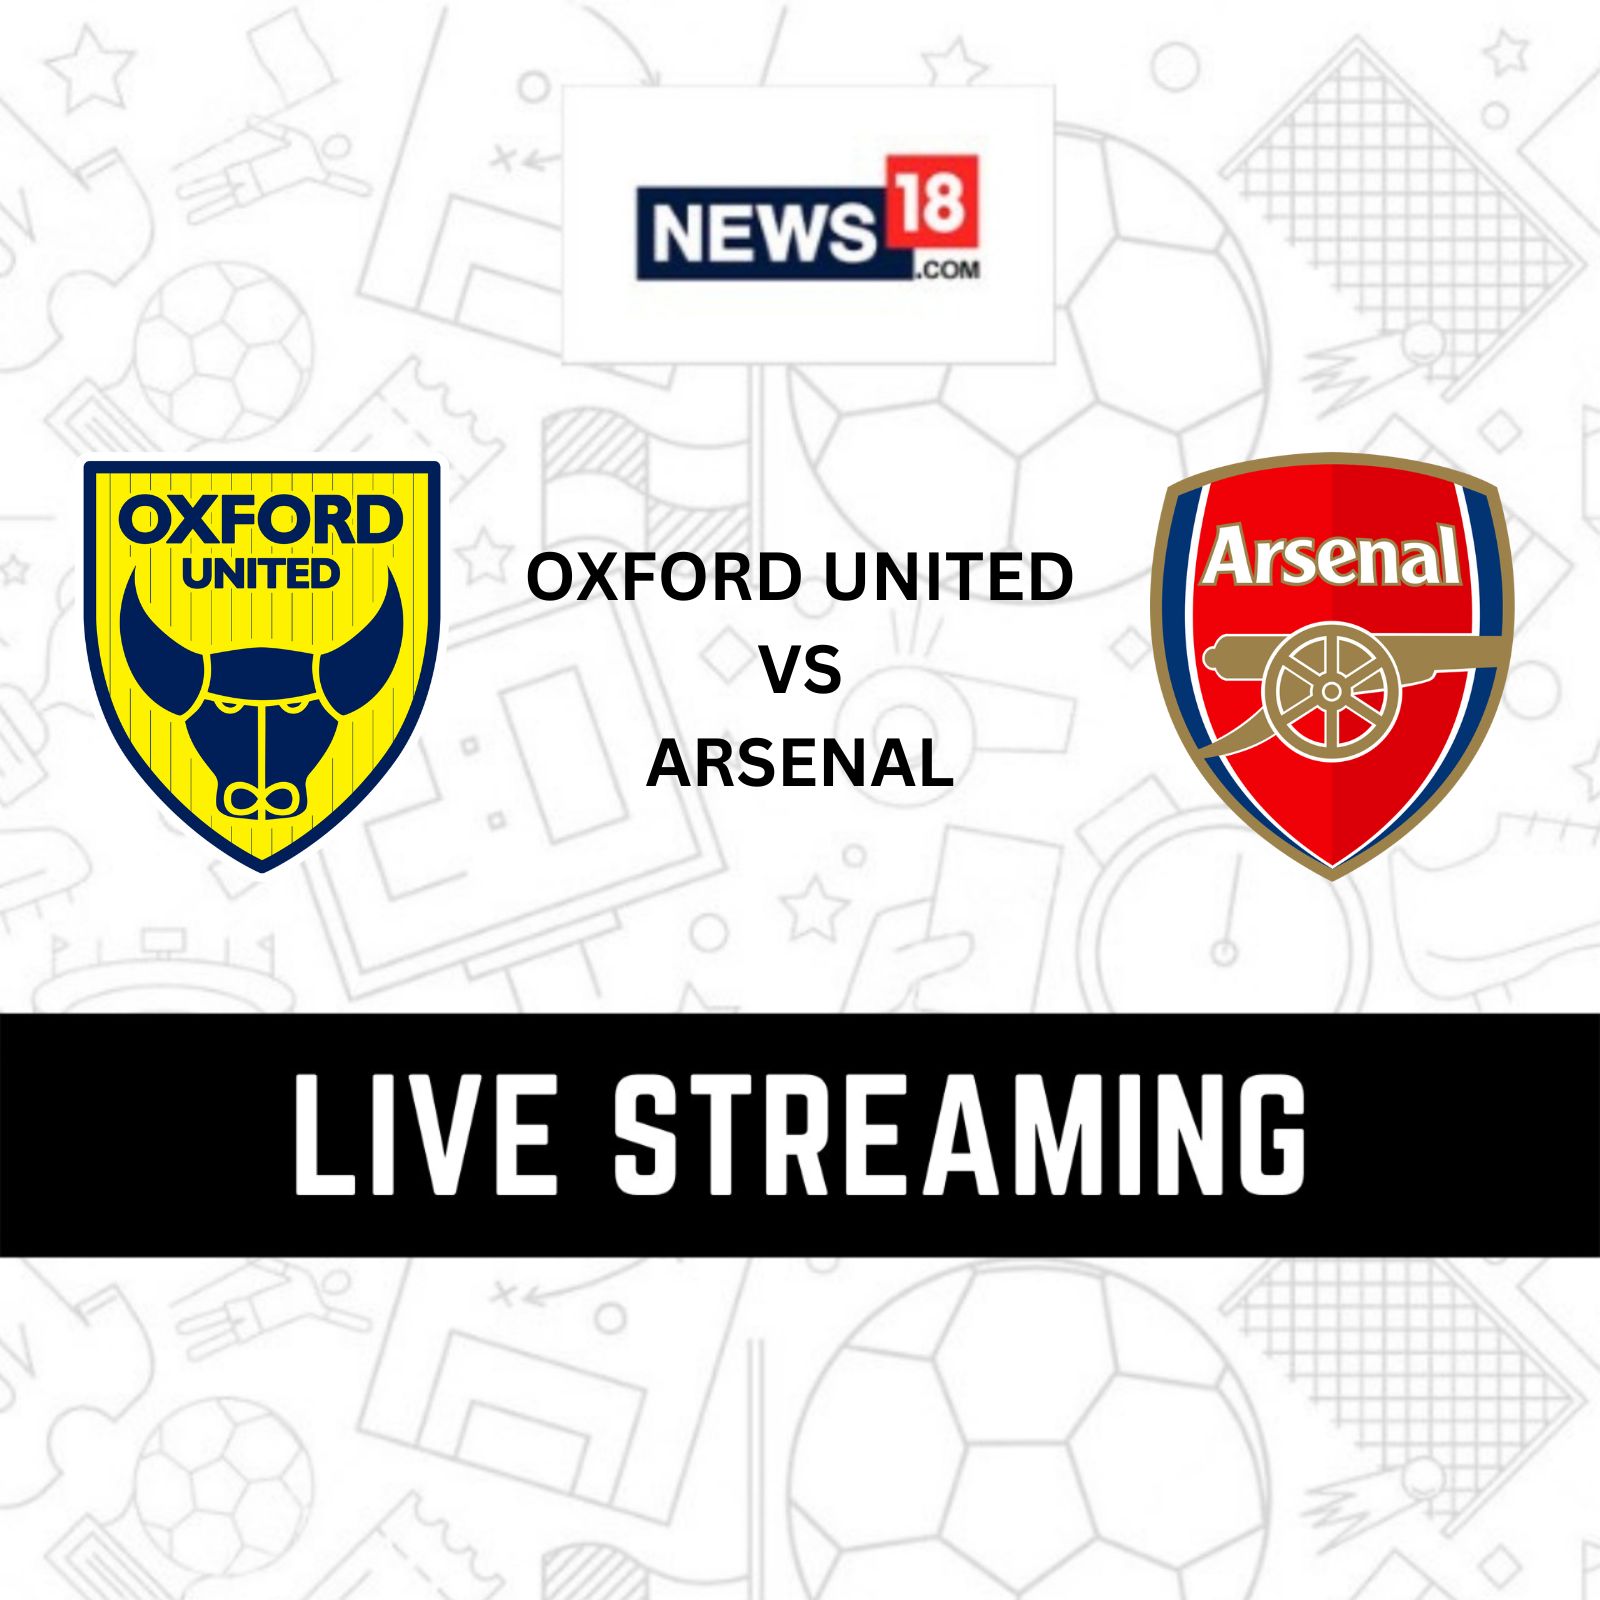 Oxford United vs Arsenal Live Streaming When and Where to Watch the FA Cup Match Live?